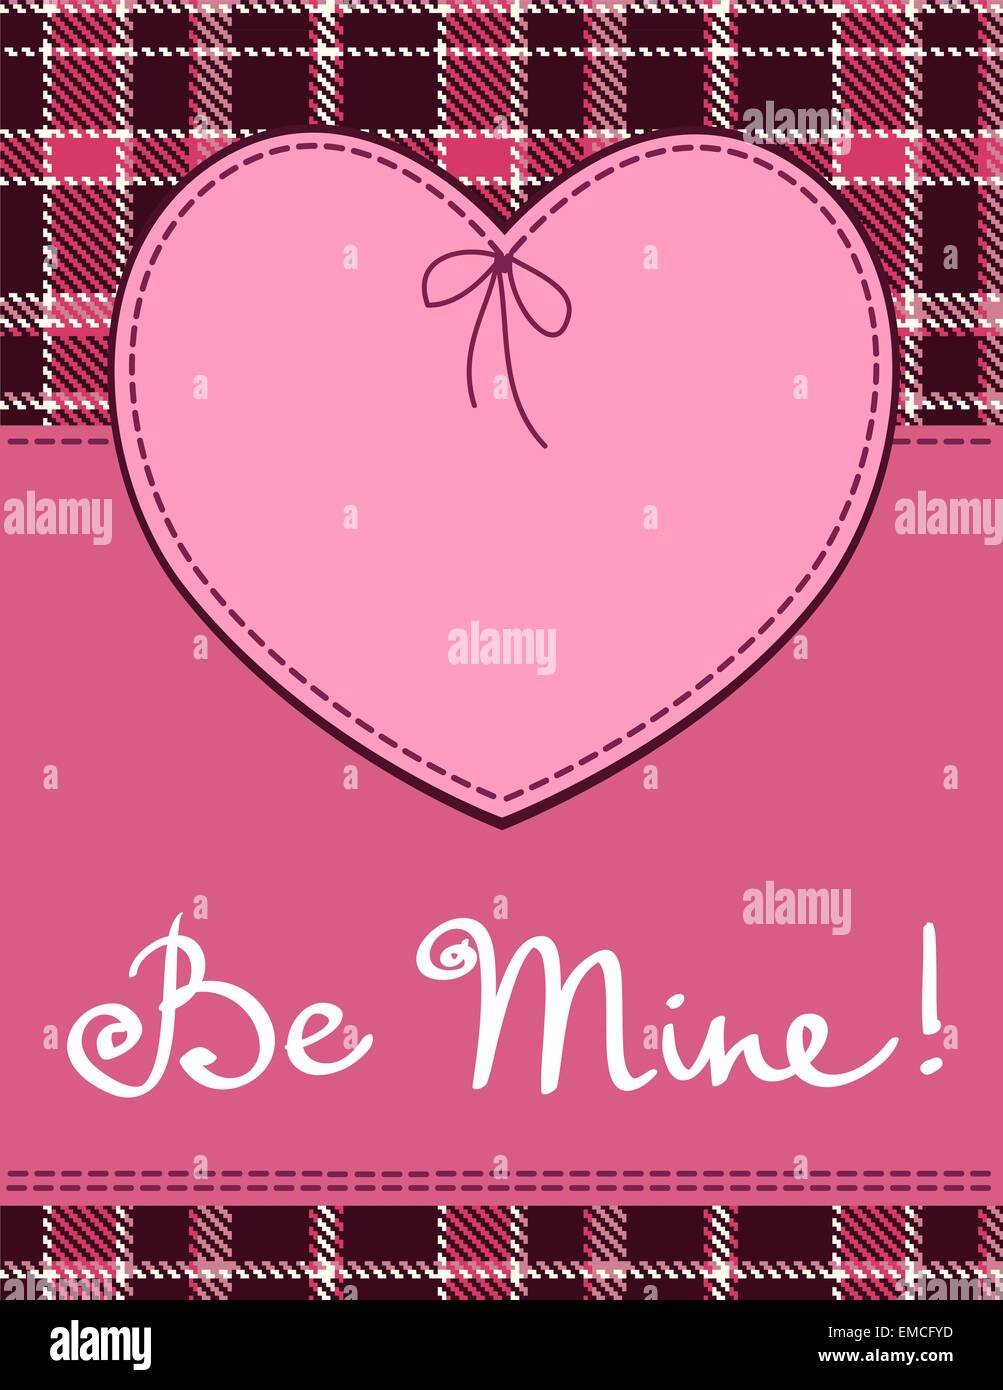 Heart in stitched textile style. Vector pink heart textile label Stock Vector